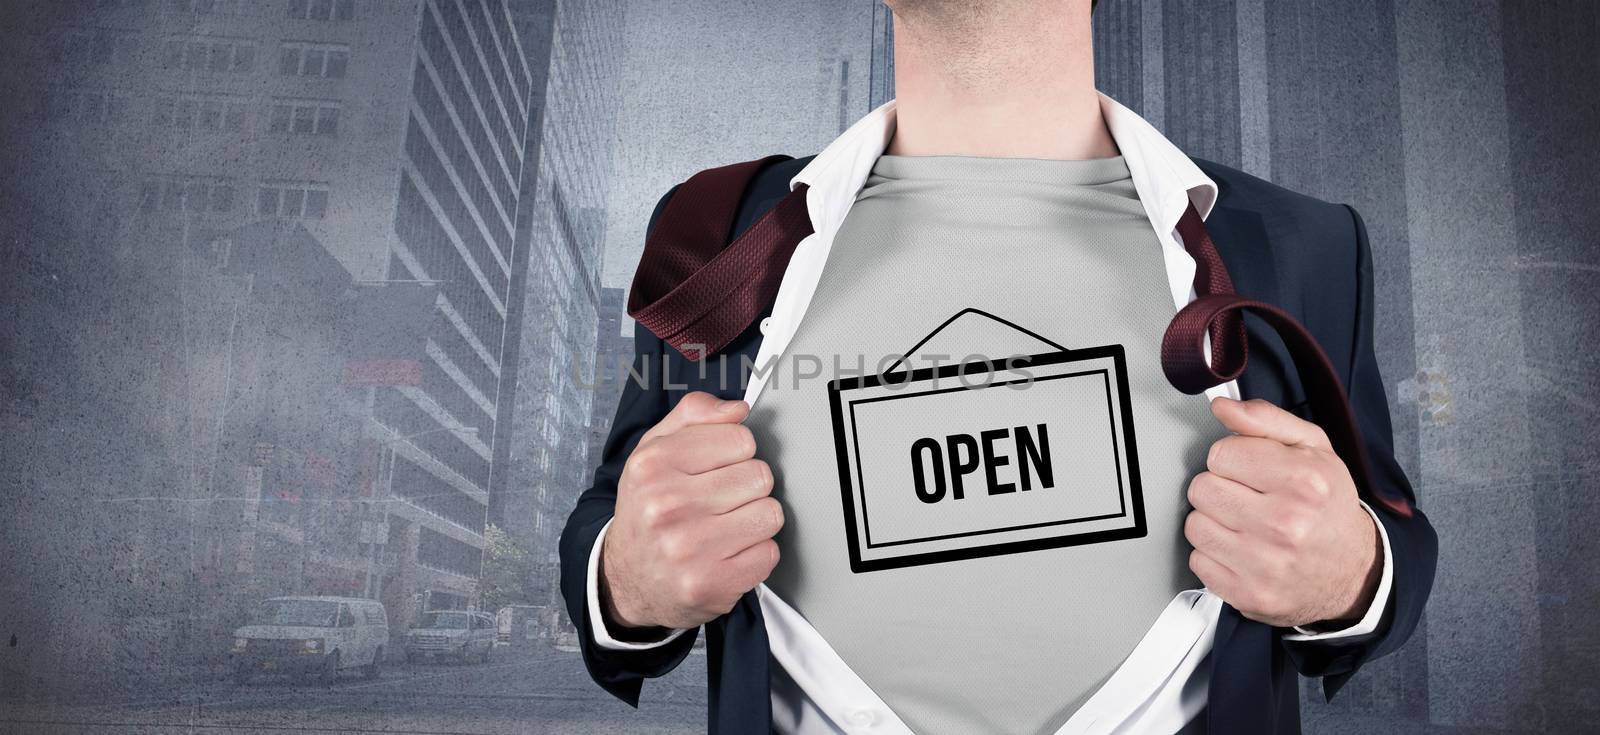 Businessman opening shirt in superhero style against urban projection on wall